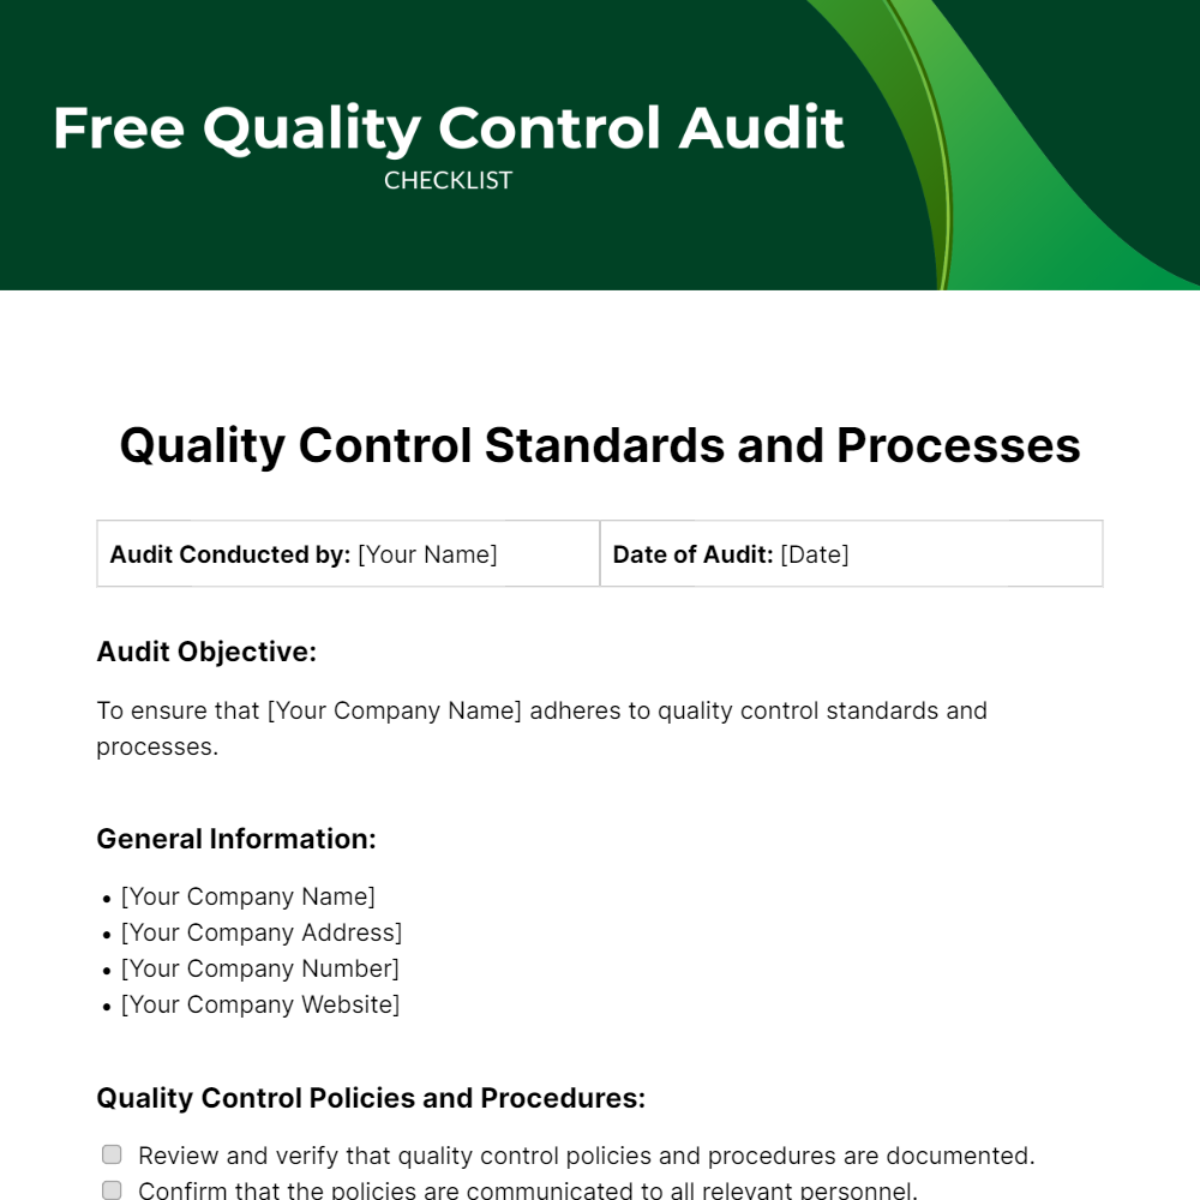 Free Quality Control Audit Checklist Template